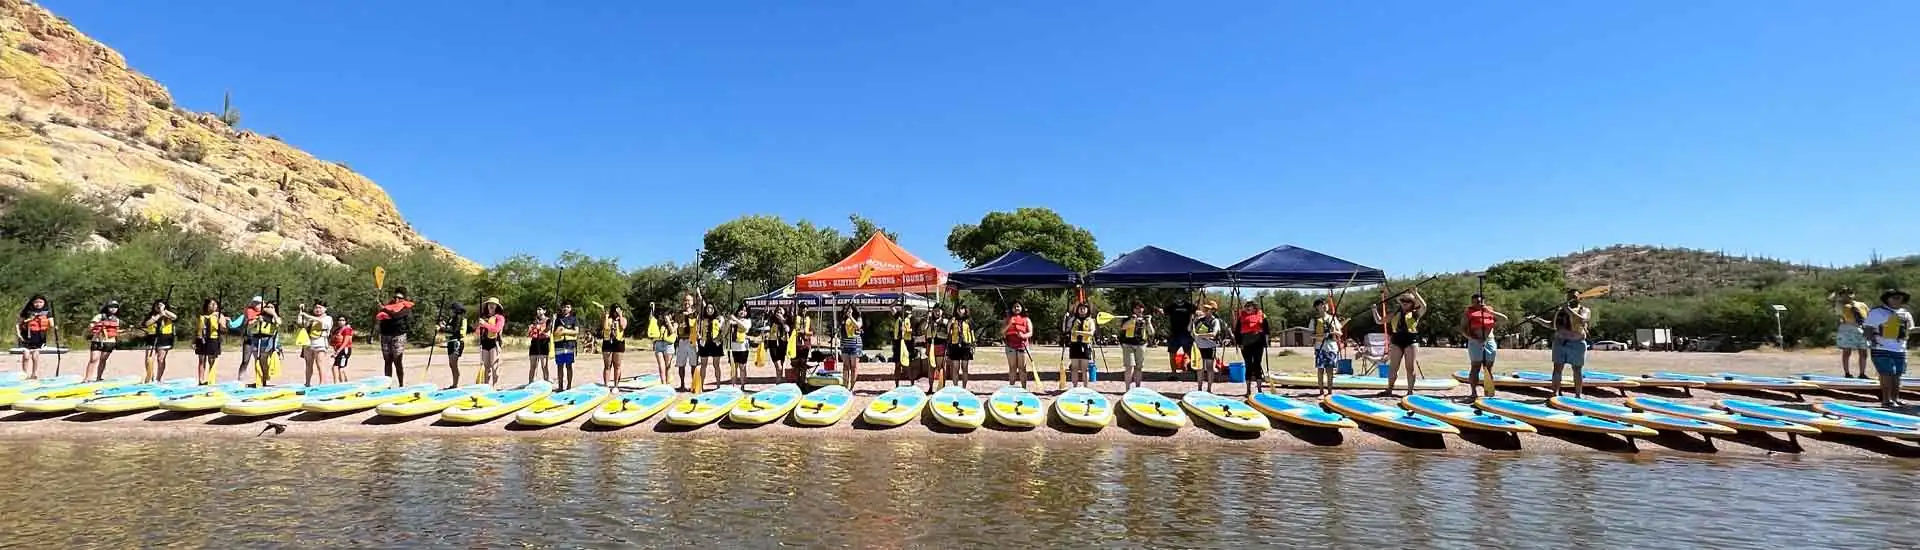 Outdoor kayaking school event at Saguaro Lake in Mesa, Arizona. Riverbound Sports Paddle Company events